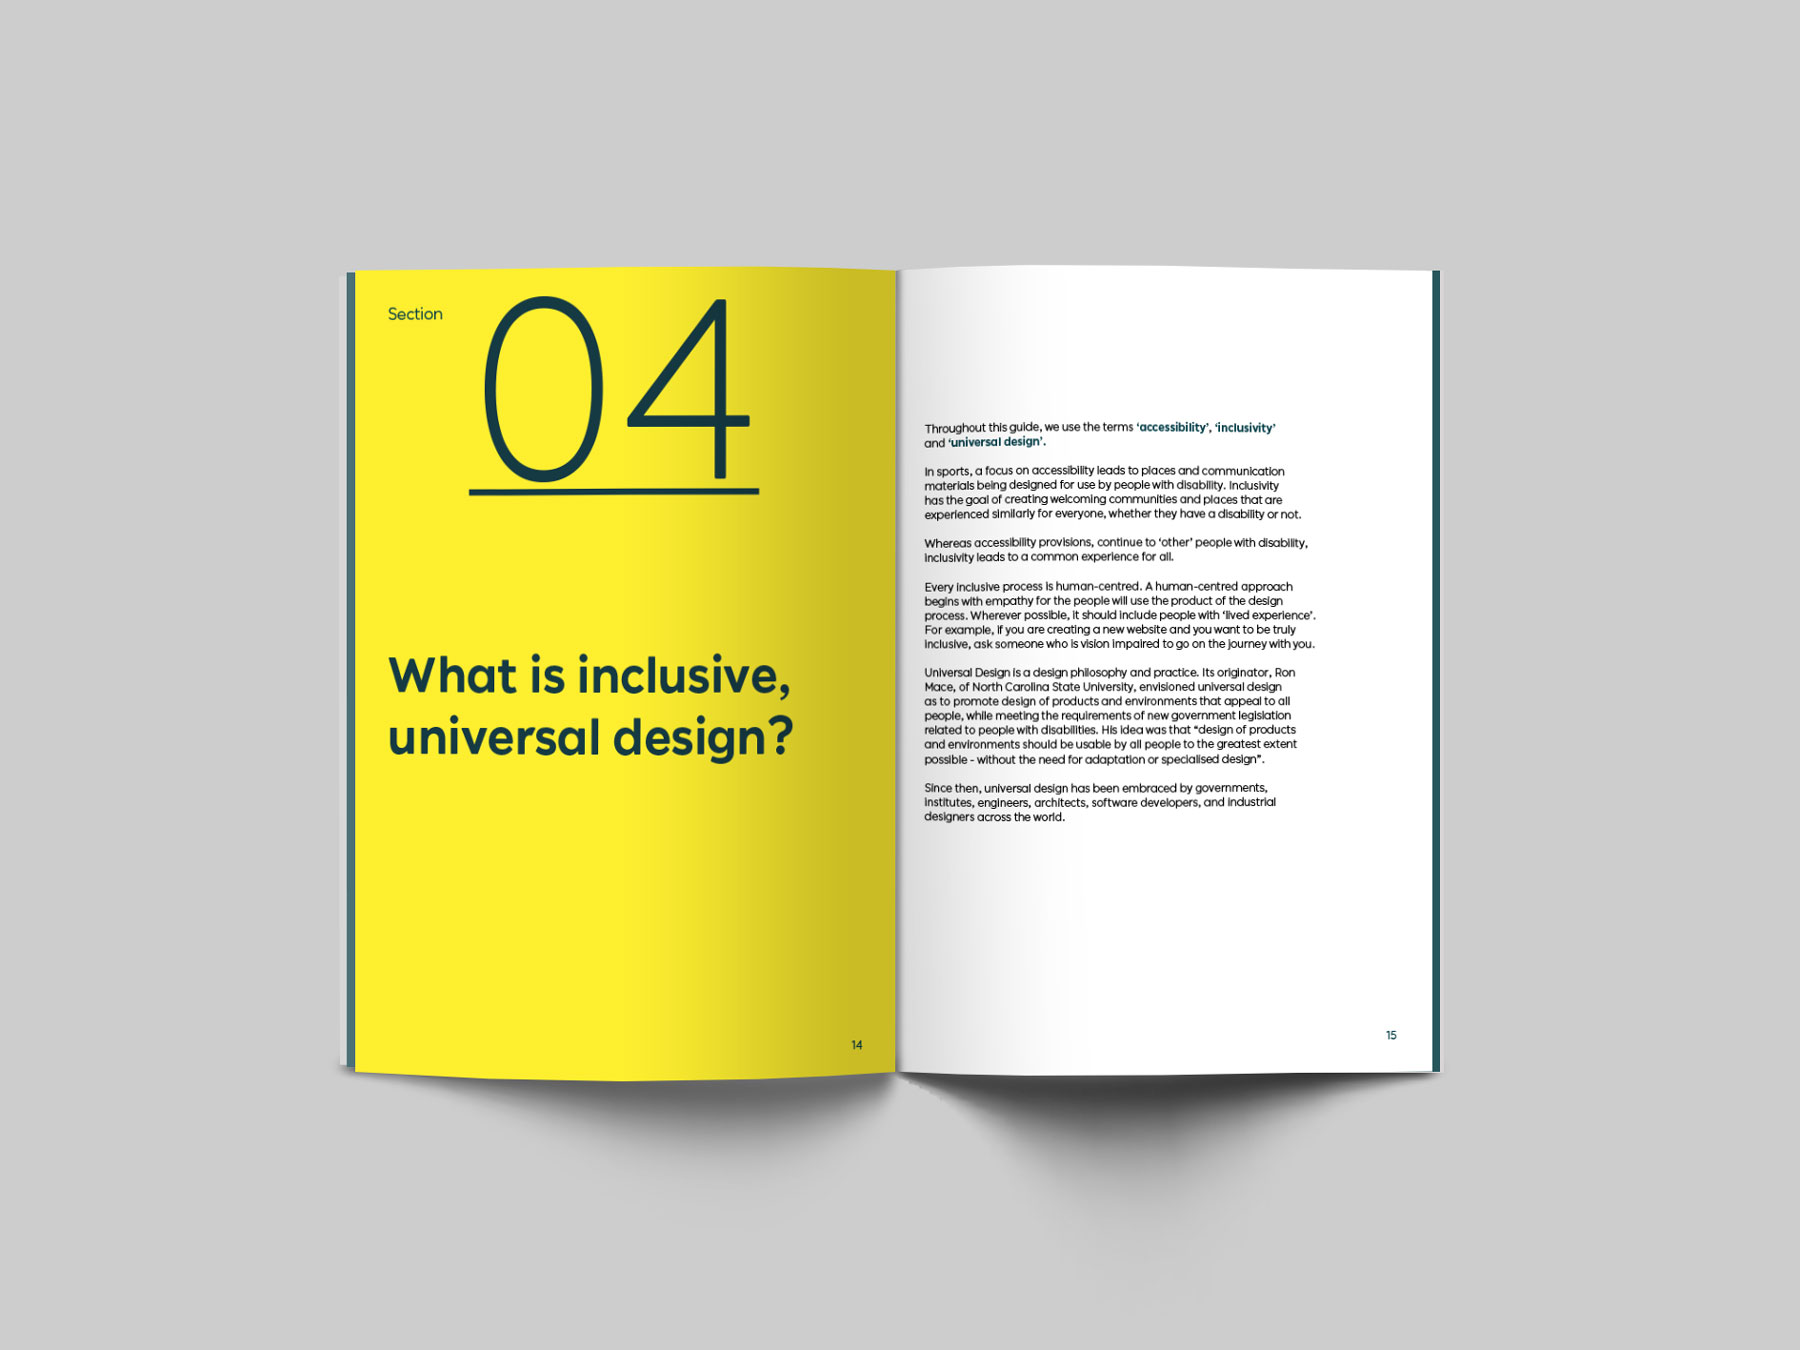 Image showing page spread of universal design guide